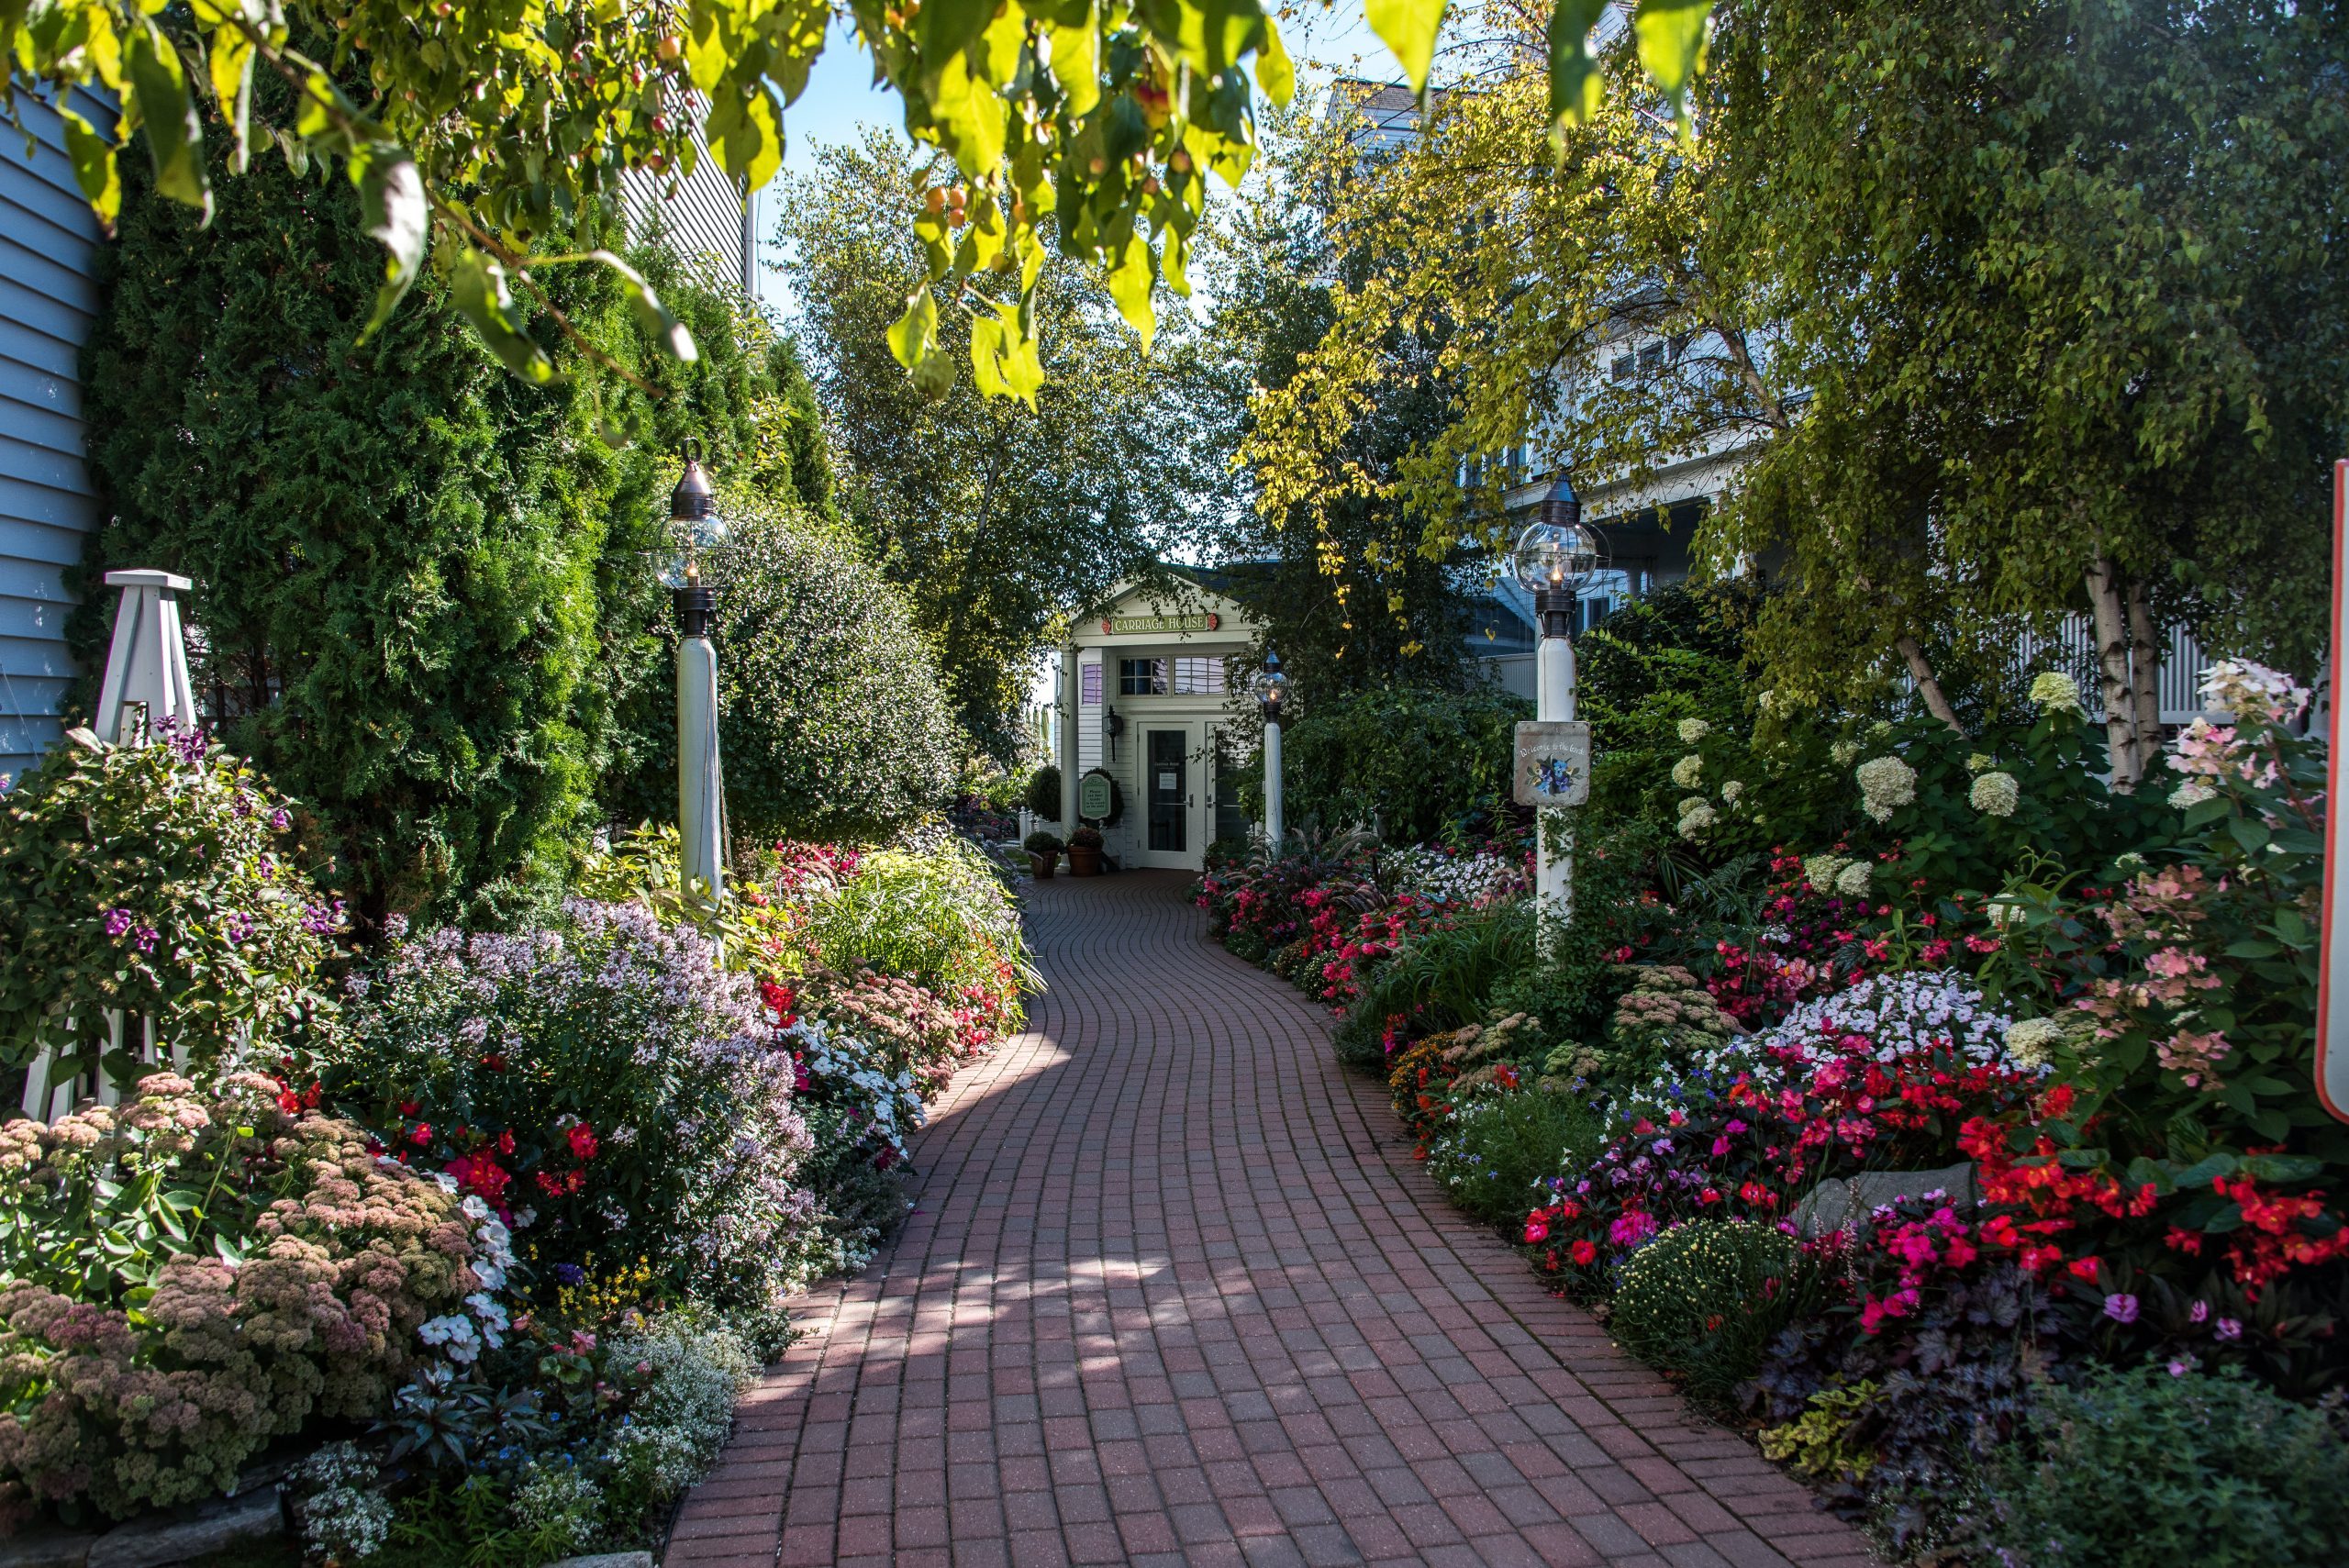 Colorful flowers line a brick paver pathway in the garden at Mackinac Island’s Hotel Iroquois.